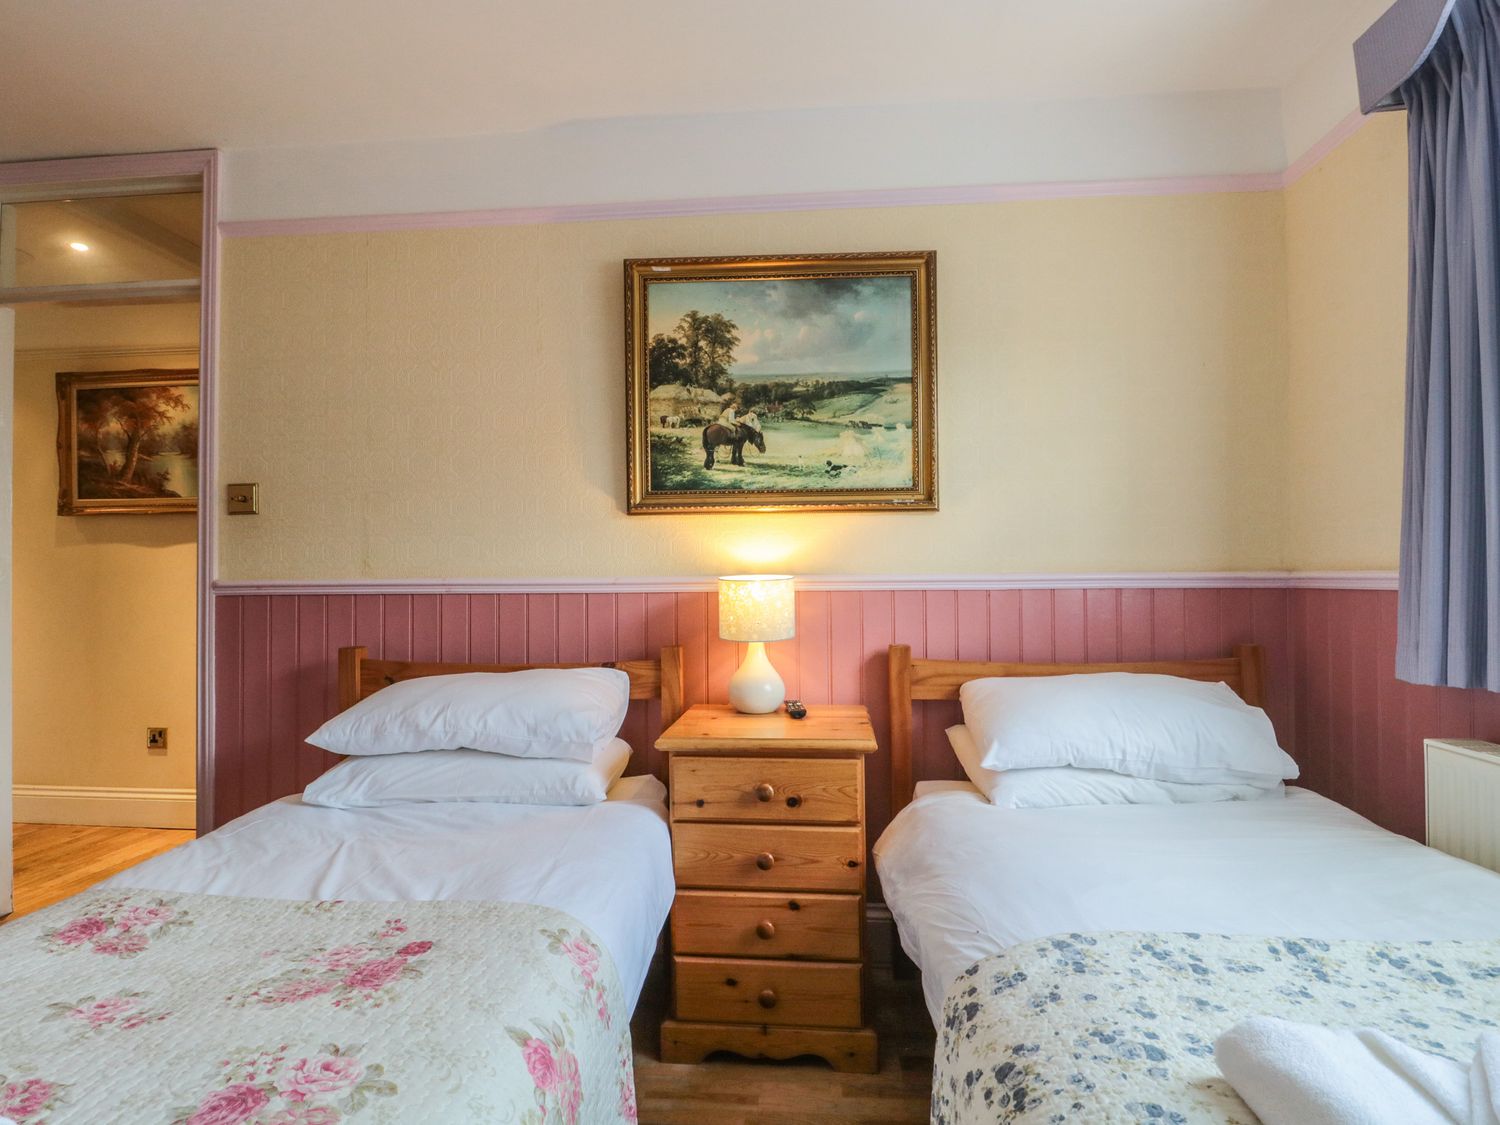 Rose Cottage, in Swanage, Dorset. Pet-friendly. Close to amenities and a beach. Hot tub. In an AONB.